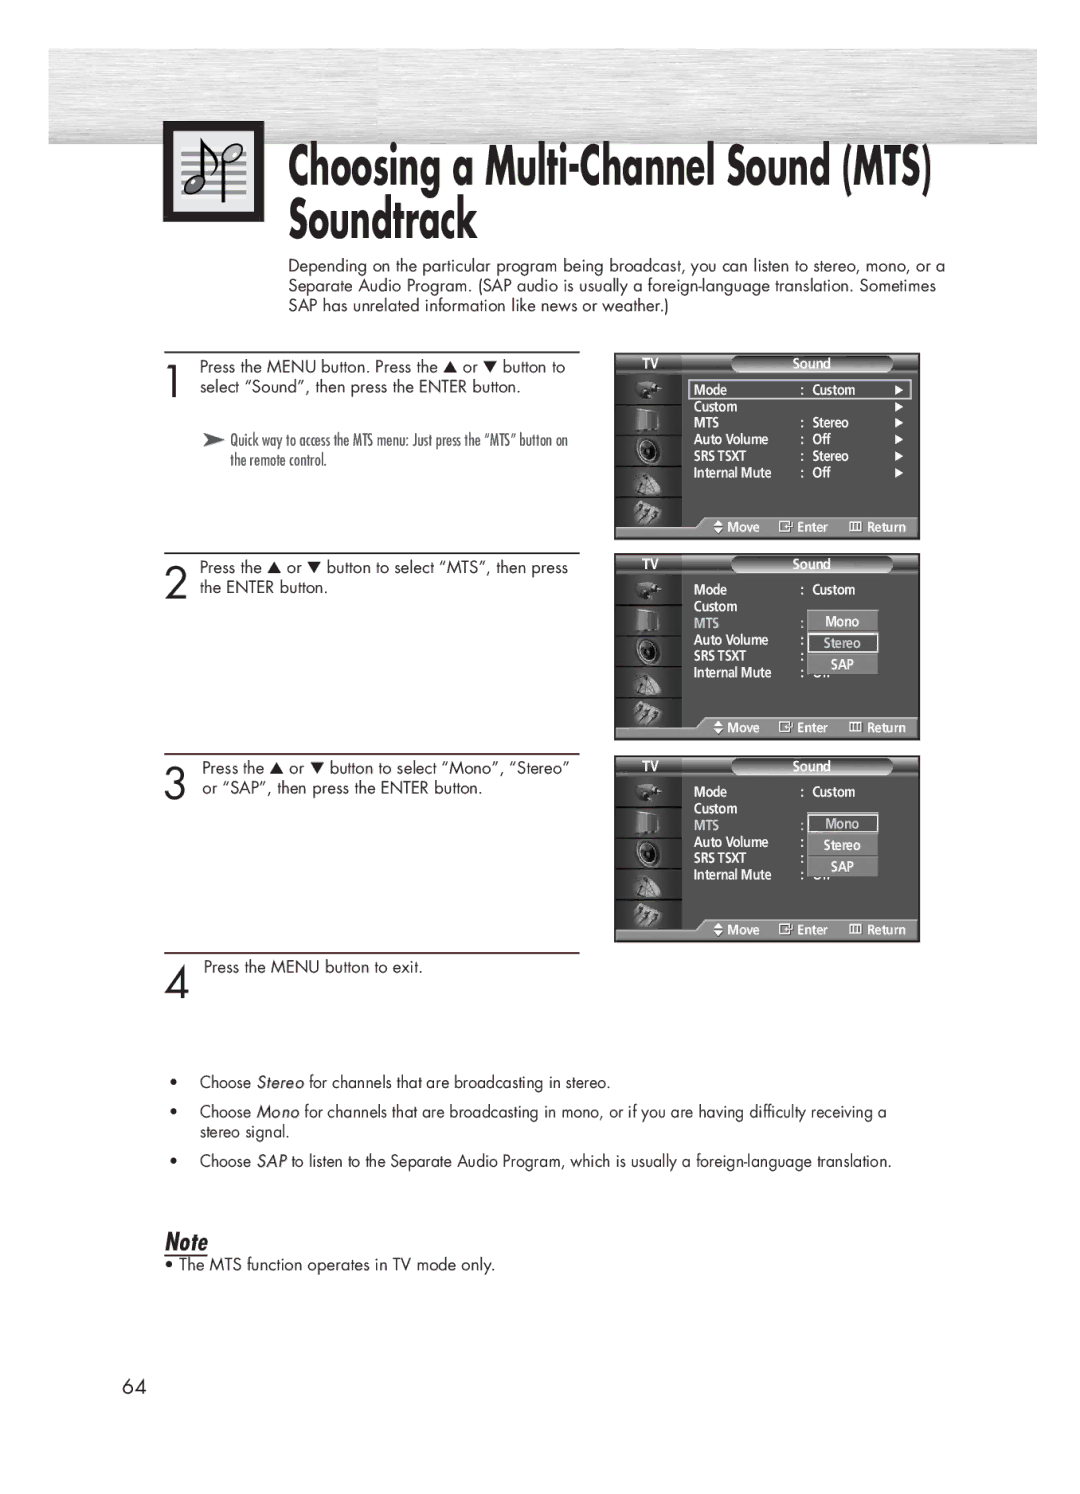 Samsung HP-P5031 manual Choosing a Multi-Channel Sound MTS Soundtrack 